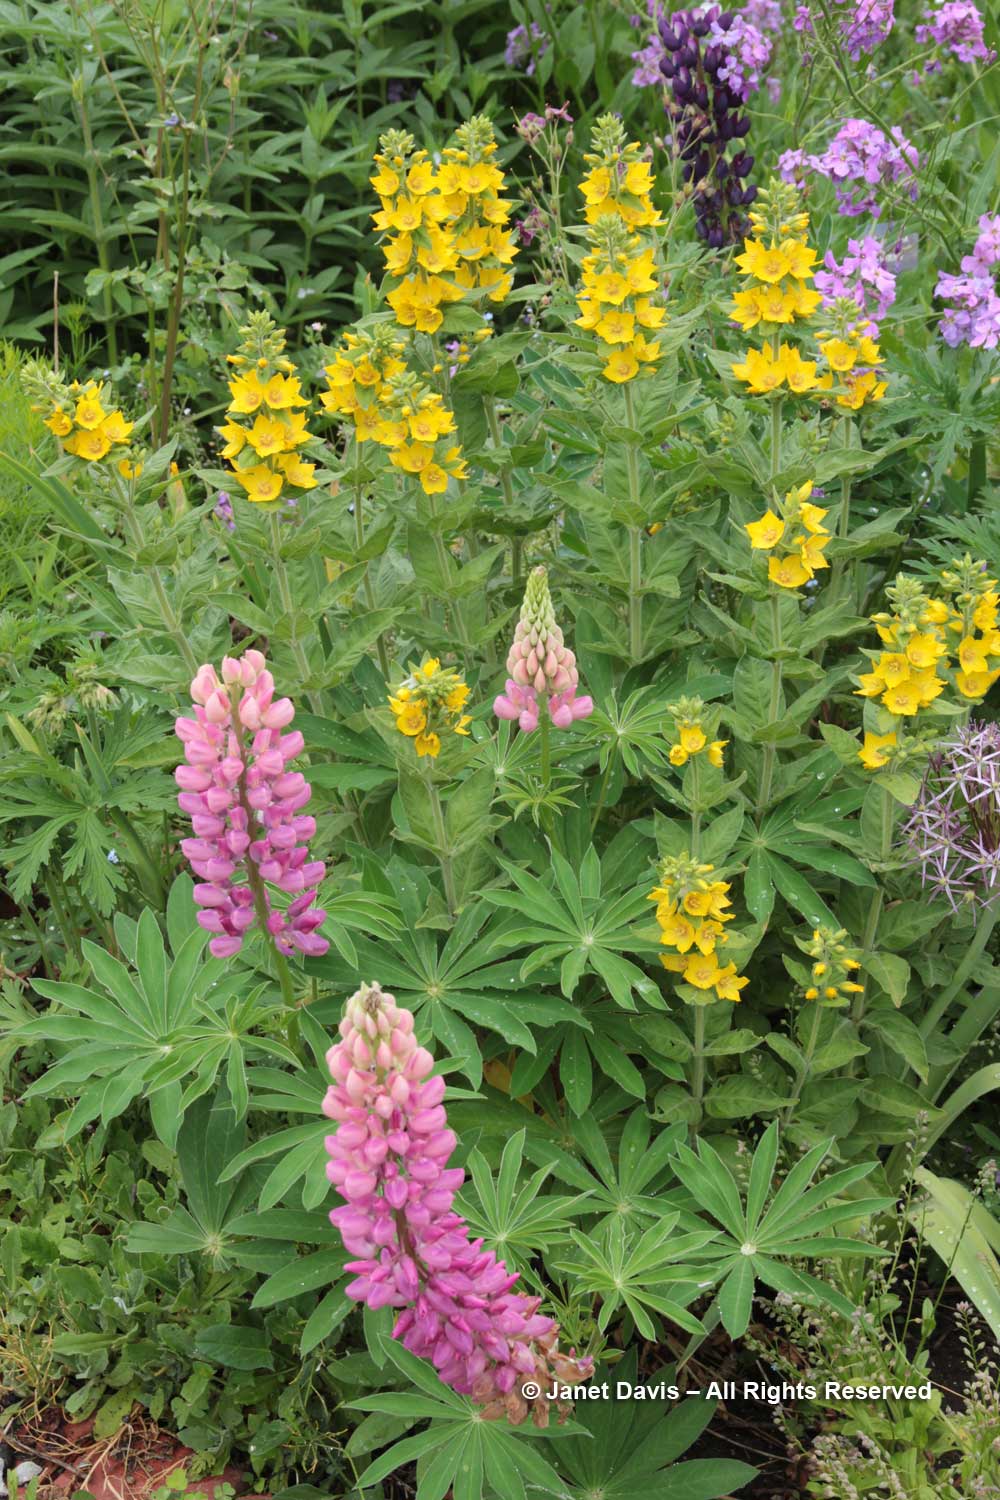 Spreading Beauty: The Story of the Lupine Lady - The Laurel of